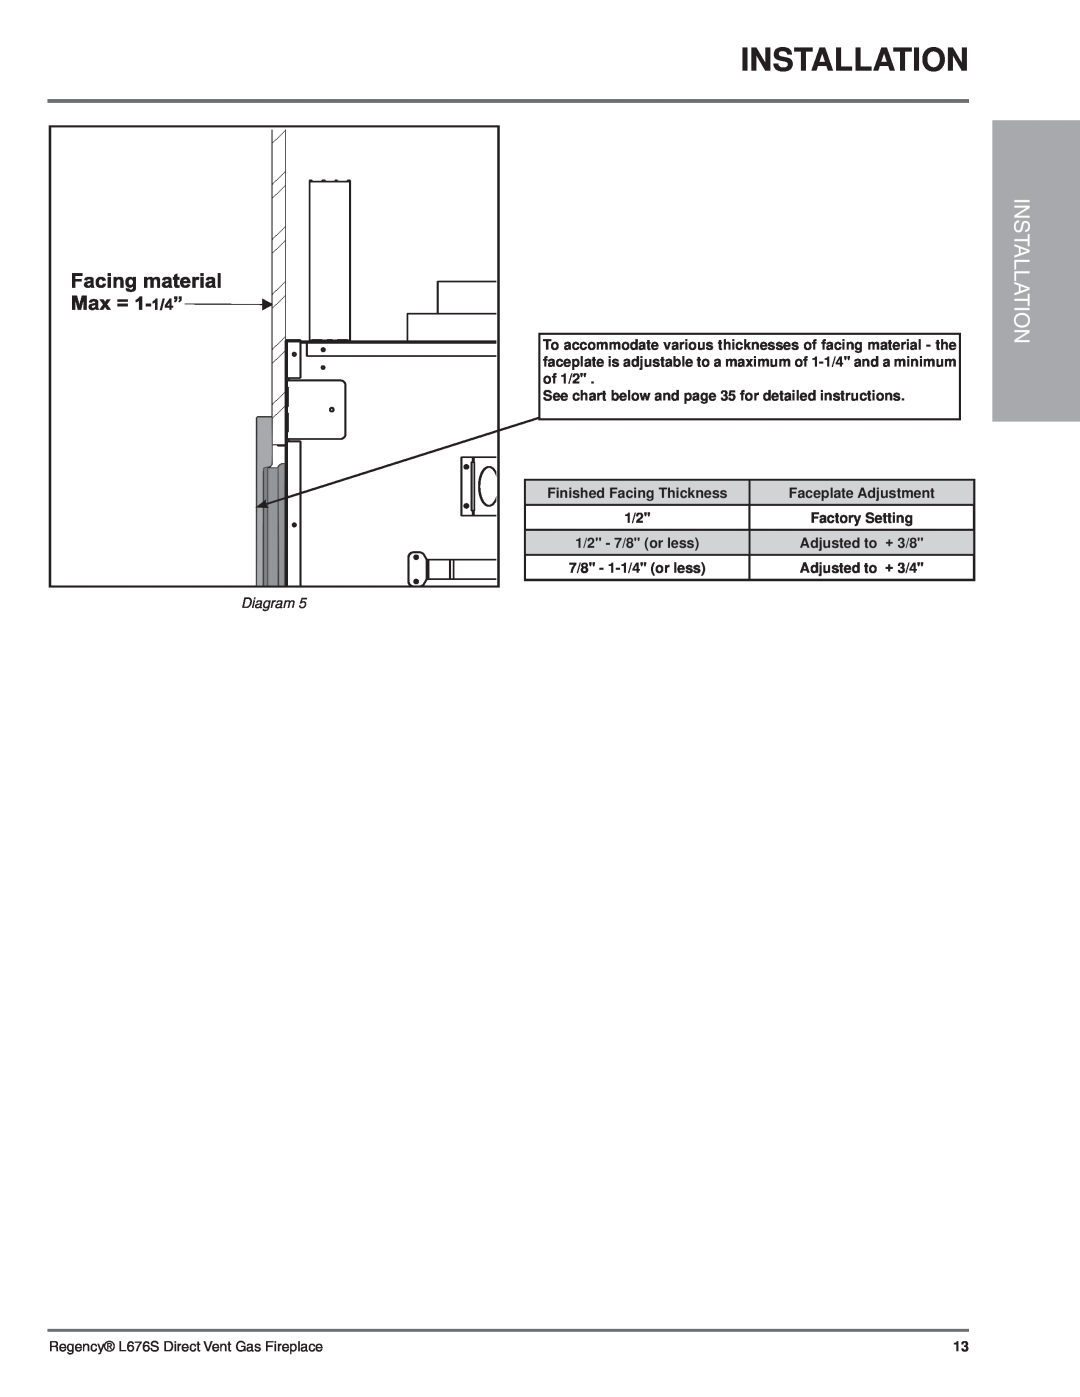 Regency L676S-NG1 Installation, Diagram, Factory Setting, 1/2 - 7/8 or less, Adjusted to, 7/8 - 1-1/4or less 